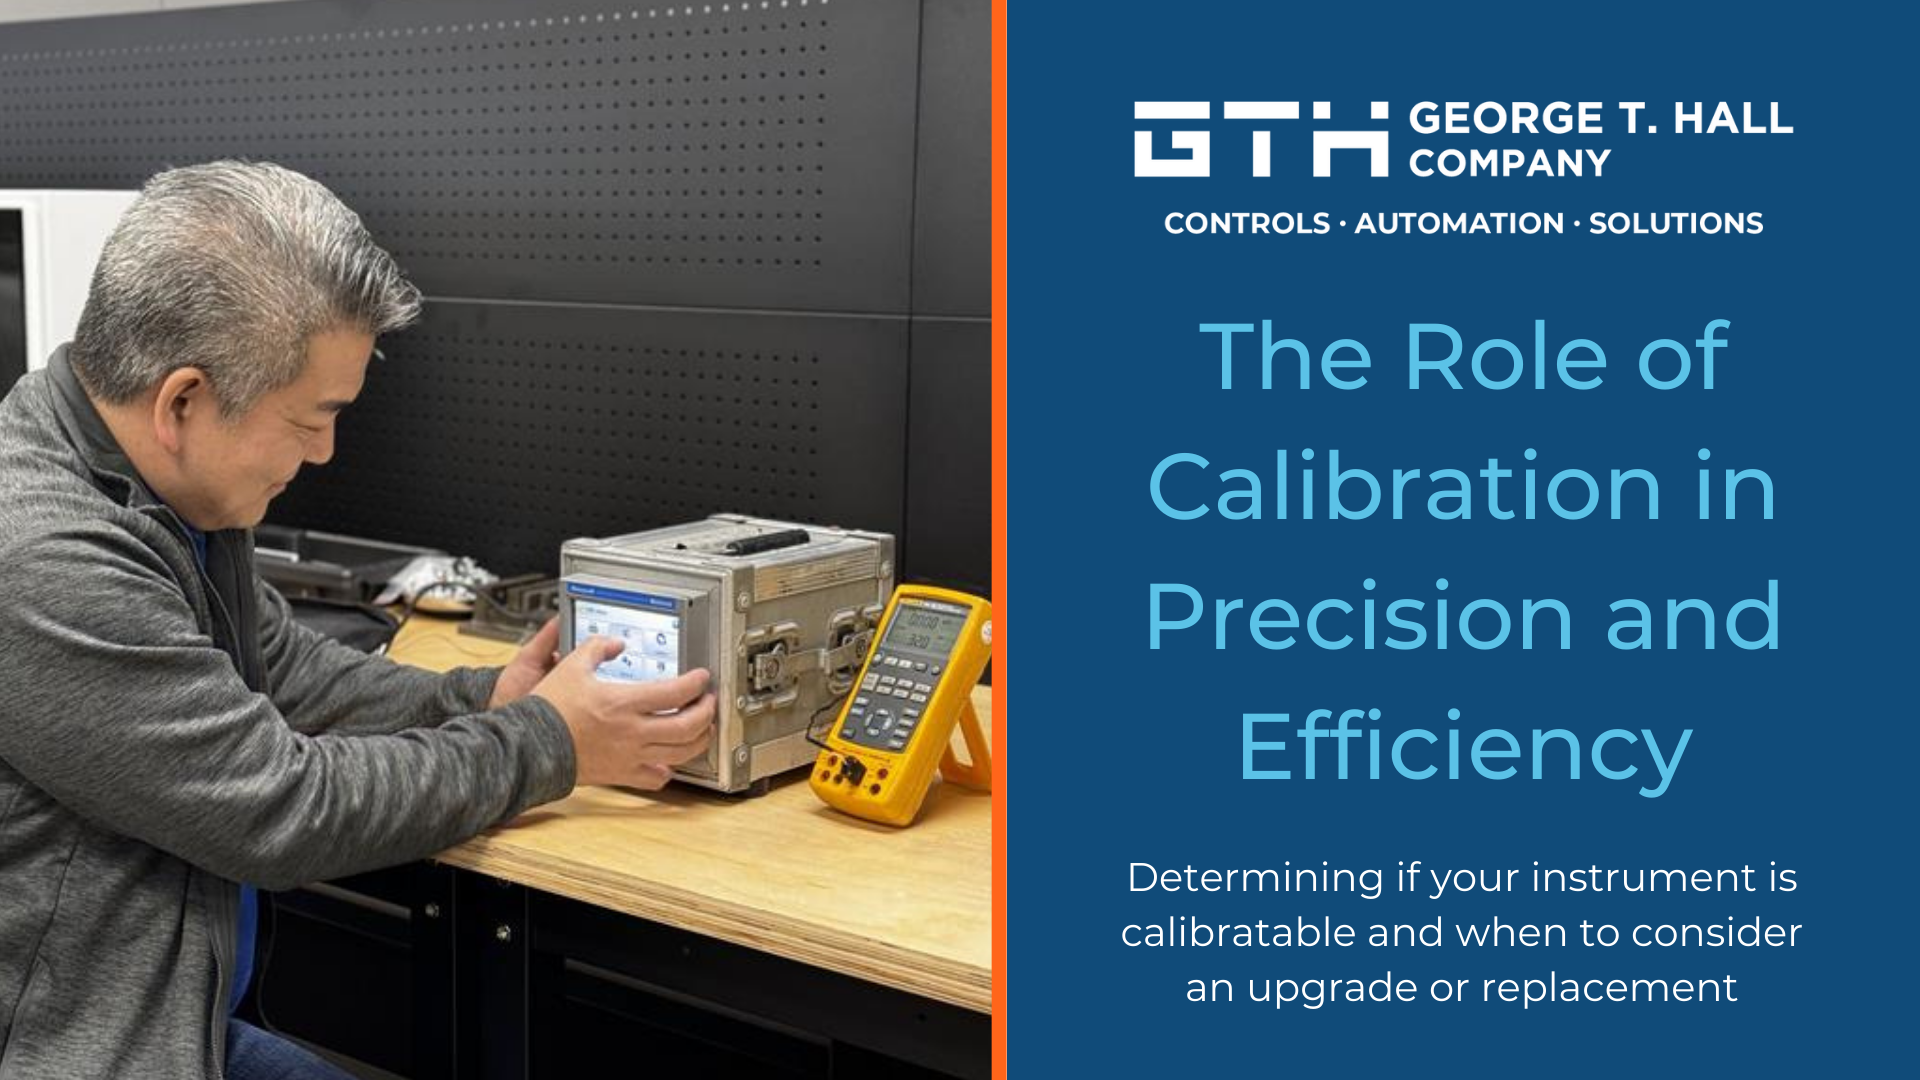 The Role of Calibration in Precision and Efficiency